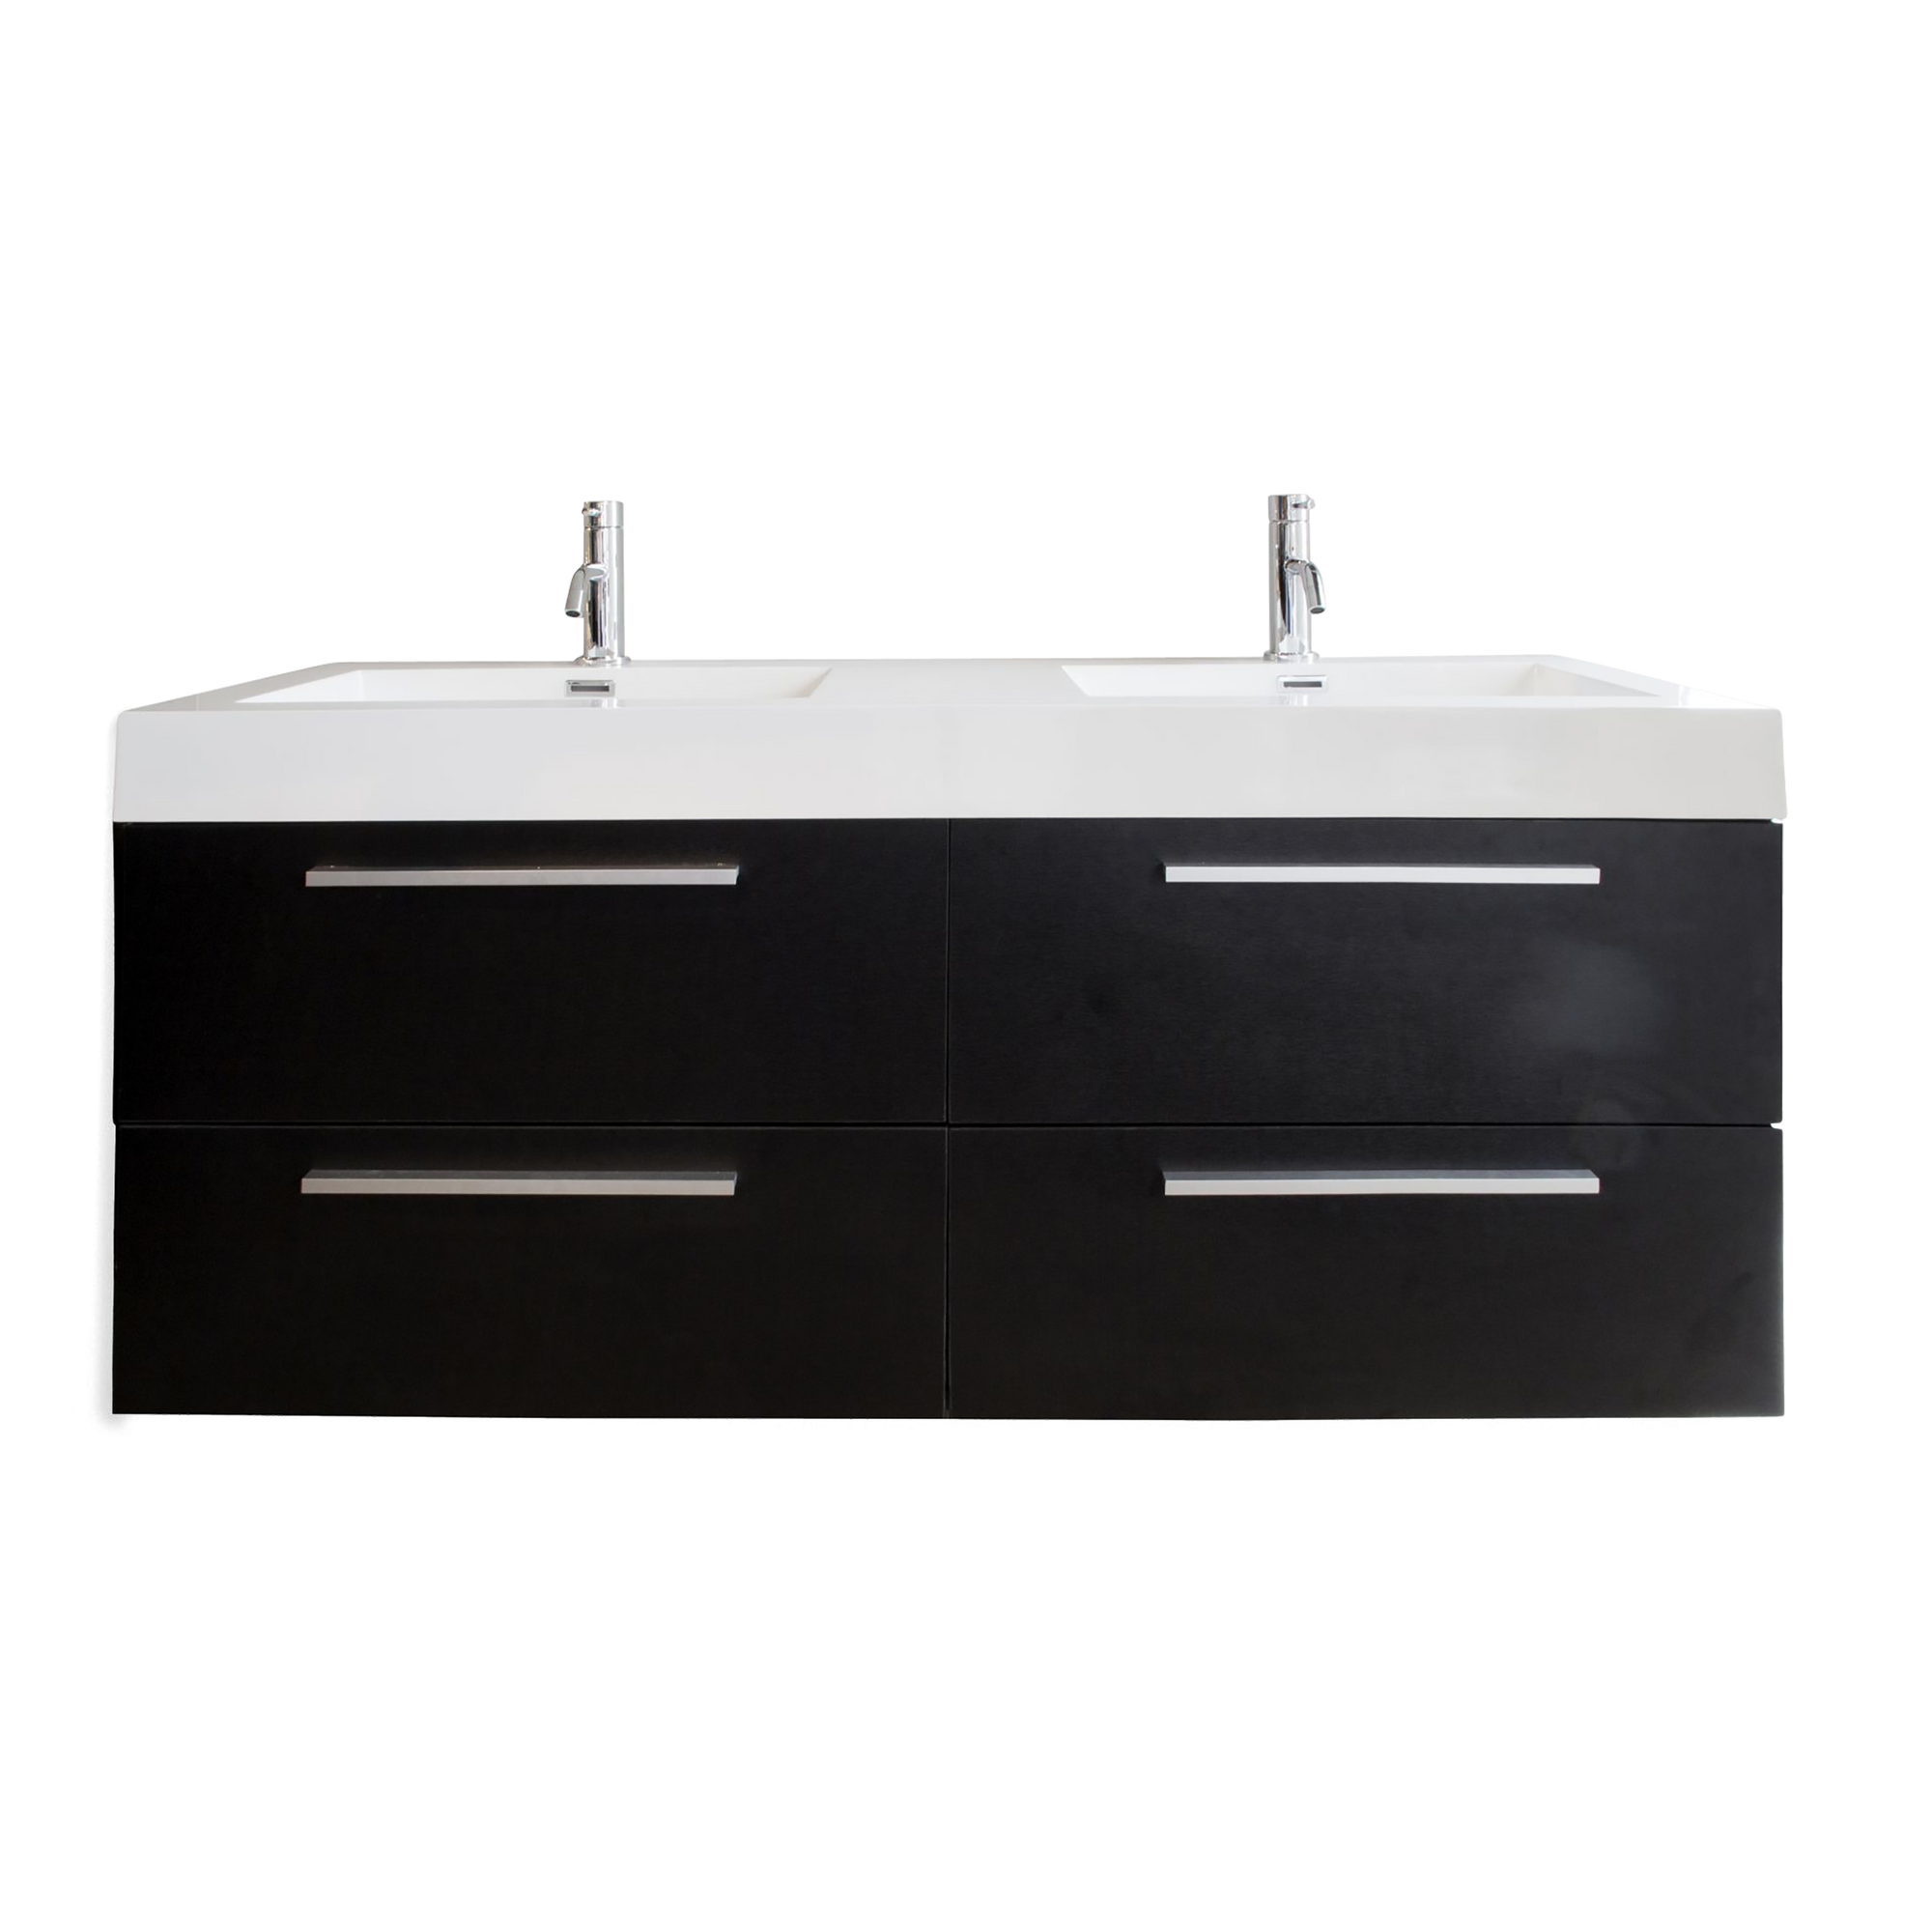 VANITY: The versatile design of the Outline vanity brings a modern sensibility to the bath.